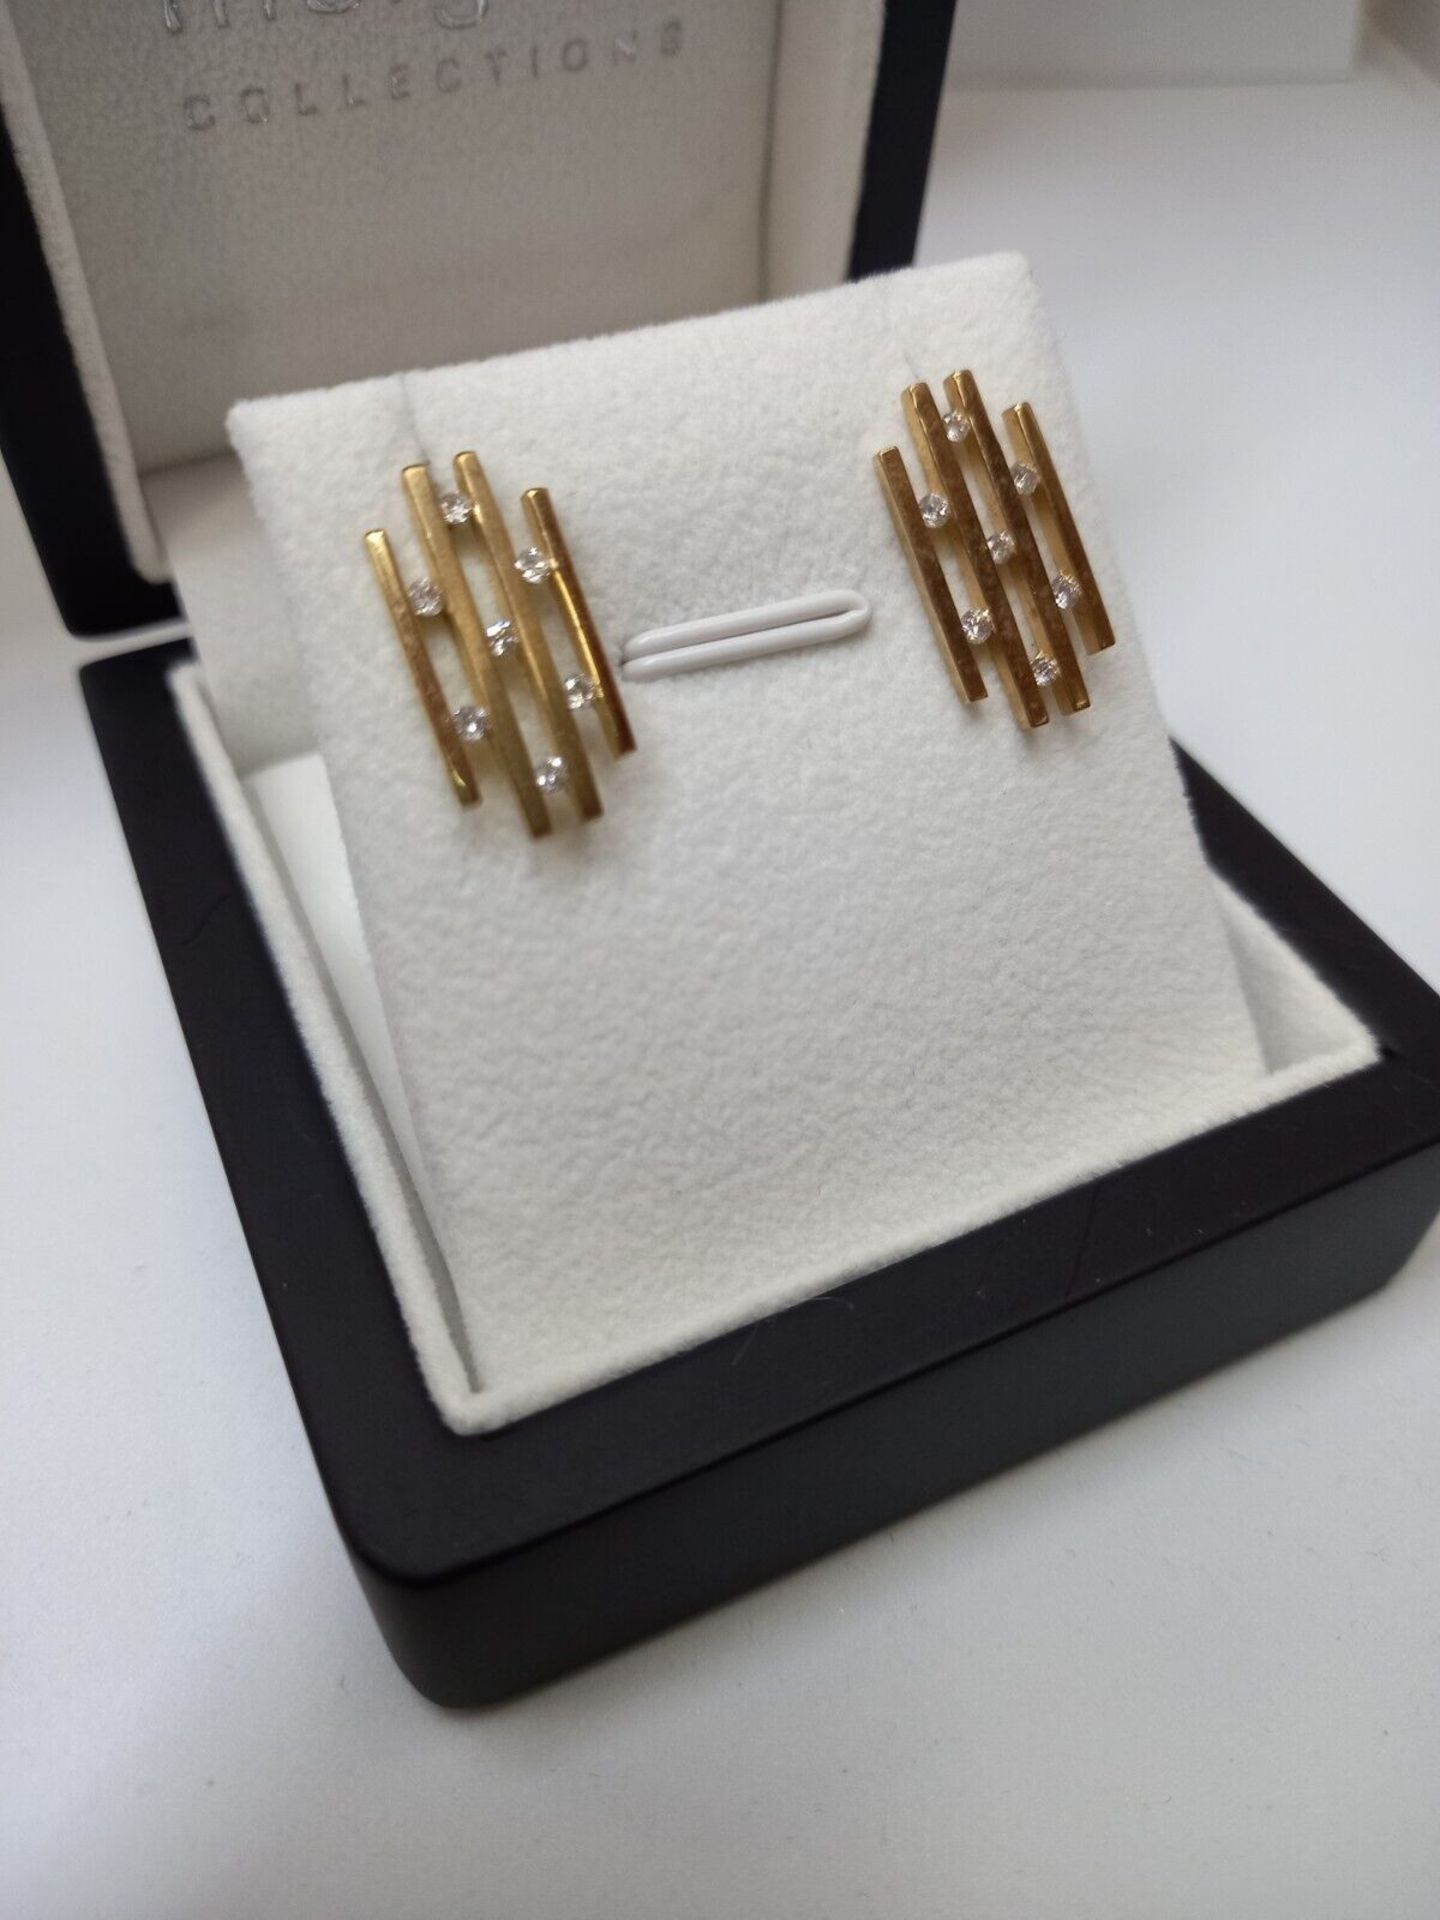 0.30CT DIAMOND EARRING IN SOLID 9CT YELLOW GOLD. IN GIFT BOX + VALUATION CERTIFICATE OF £795 - Image 3 of 5